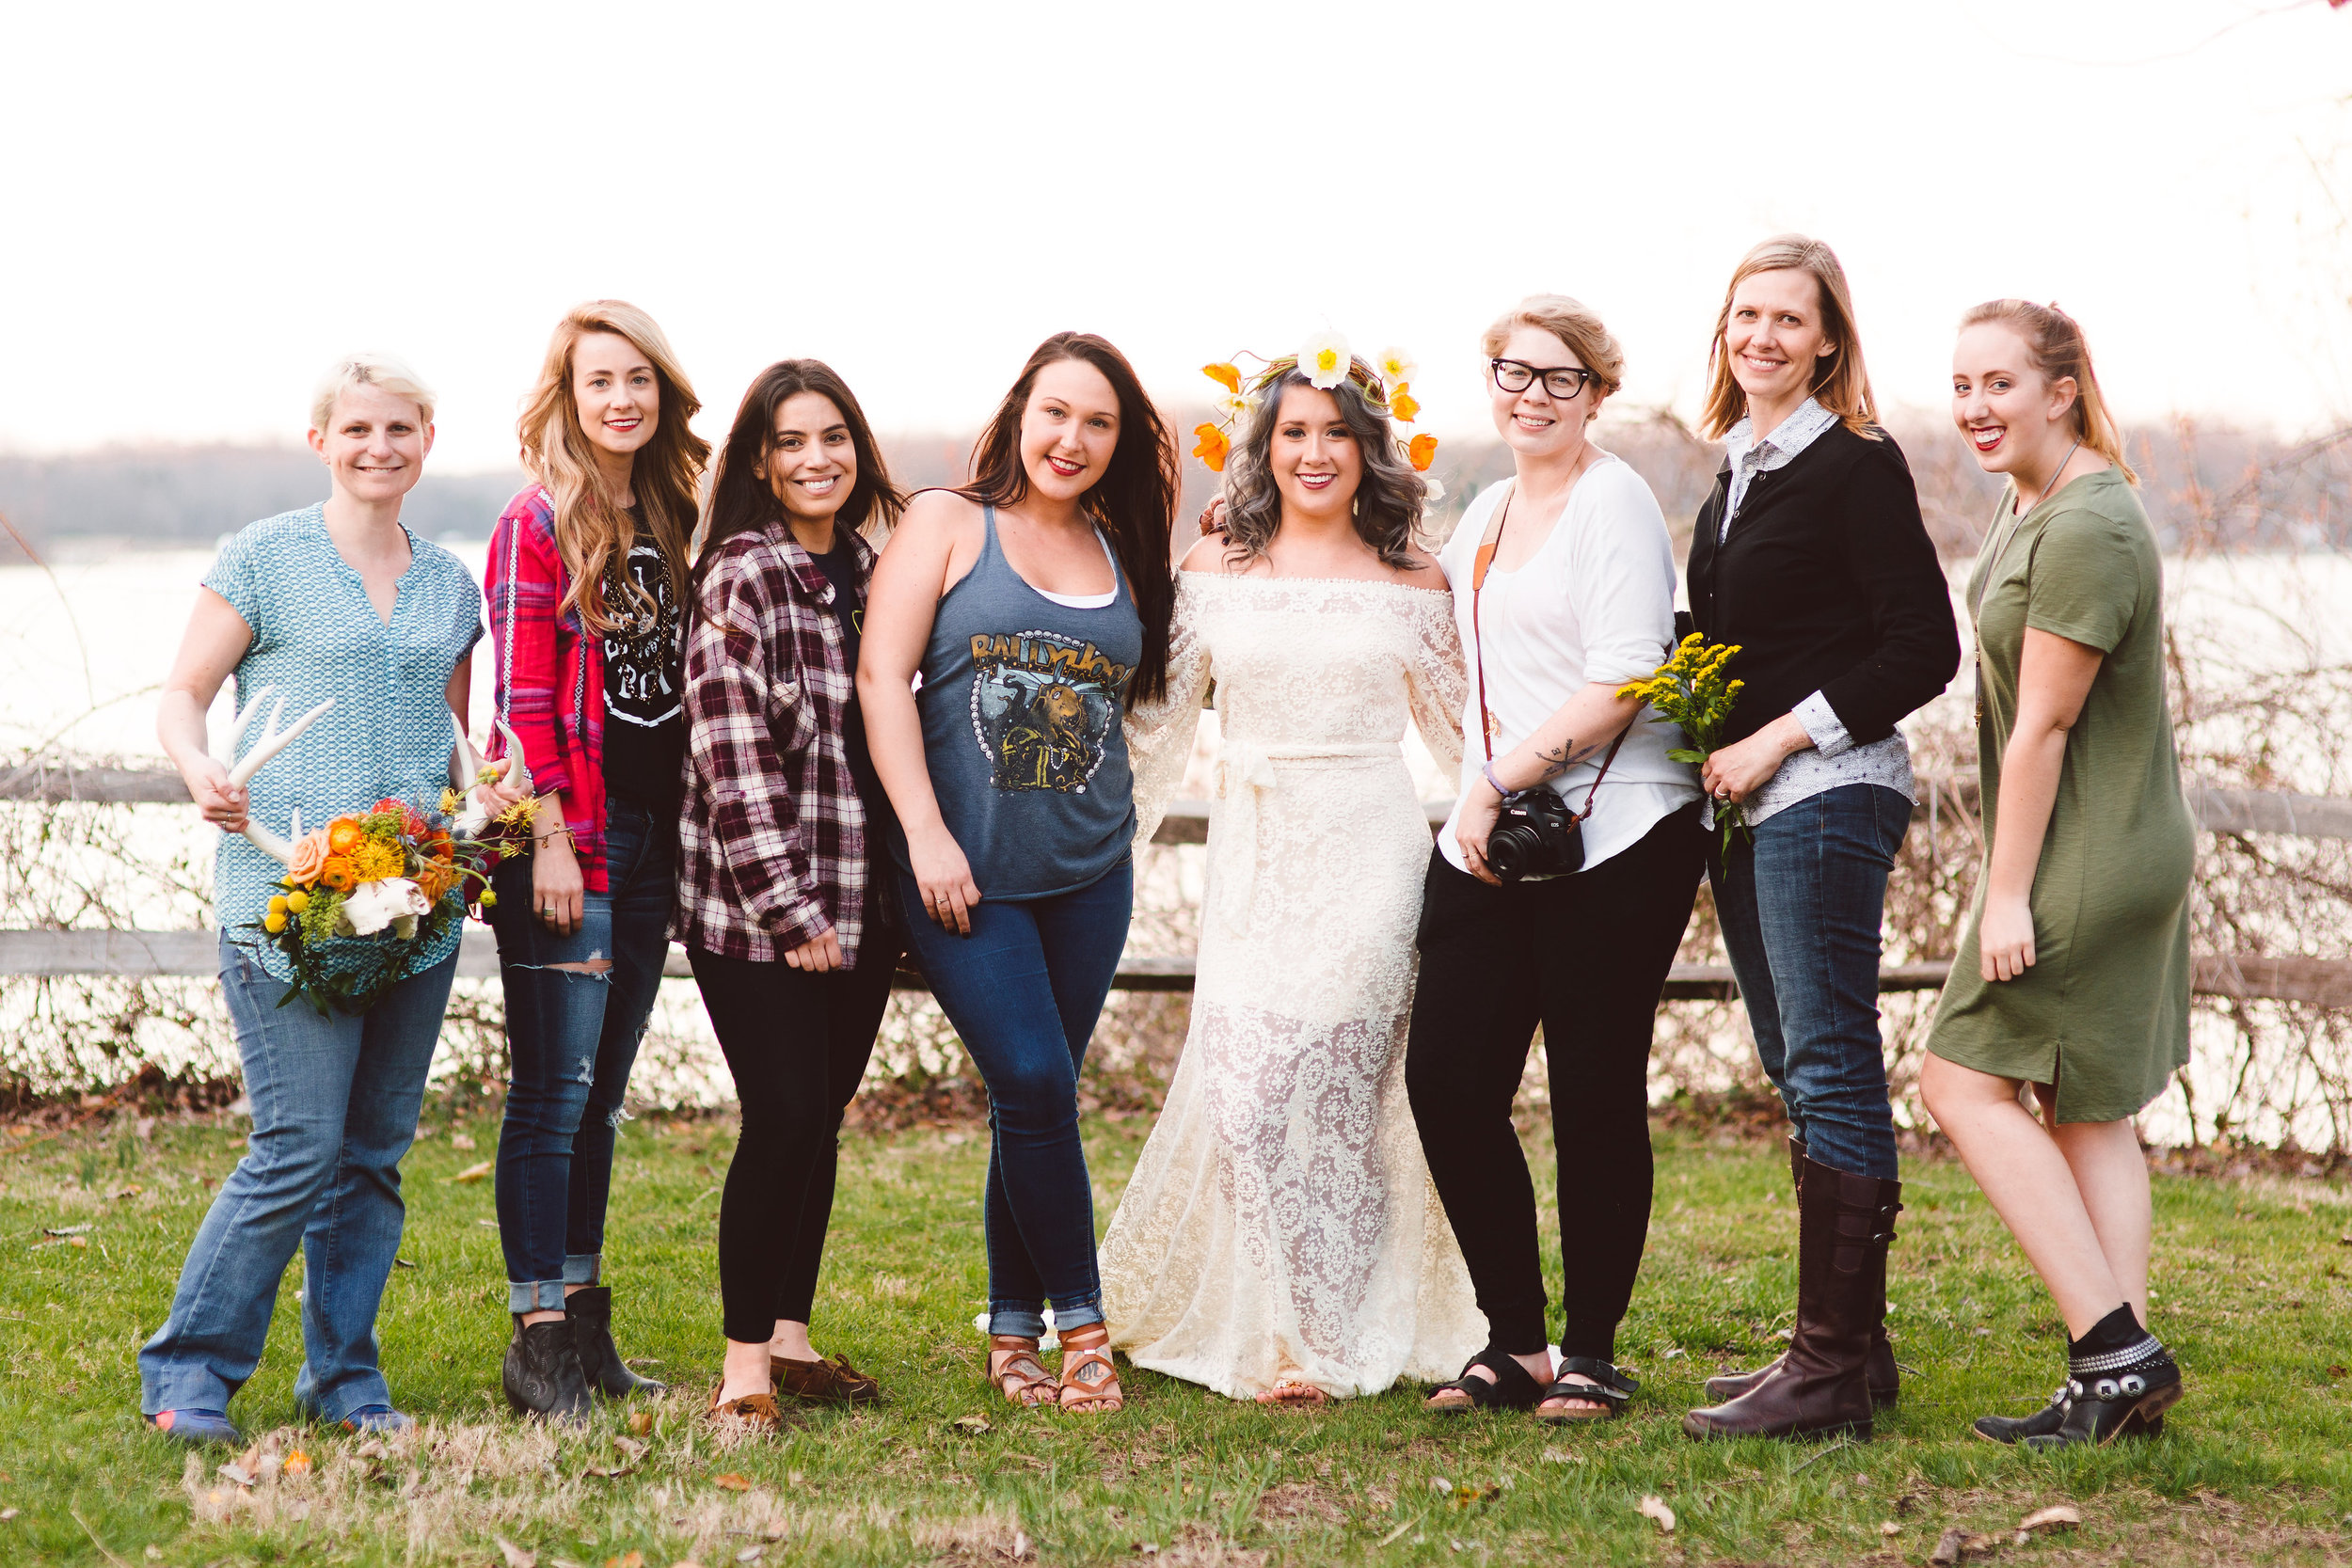 The Styled Shoot Team